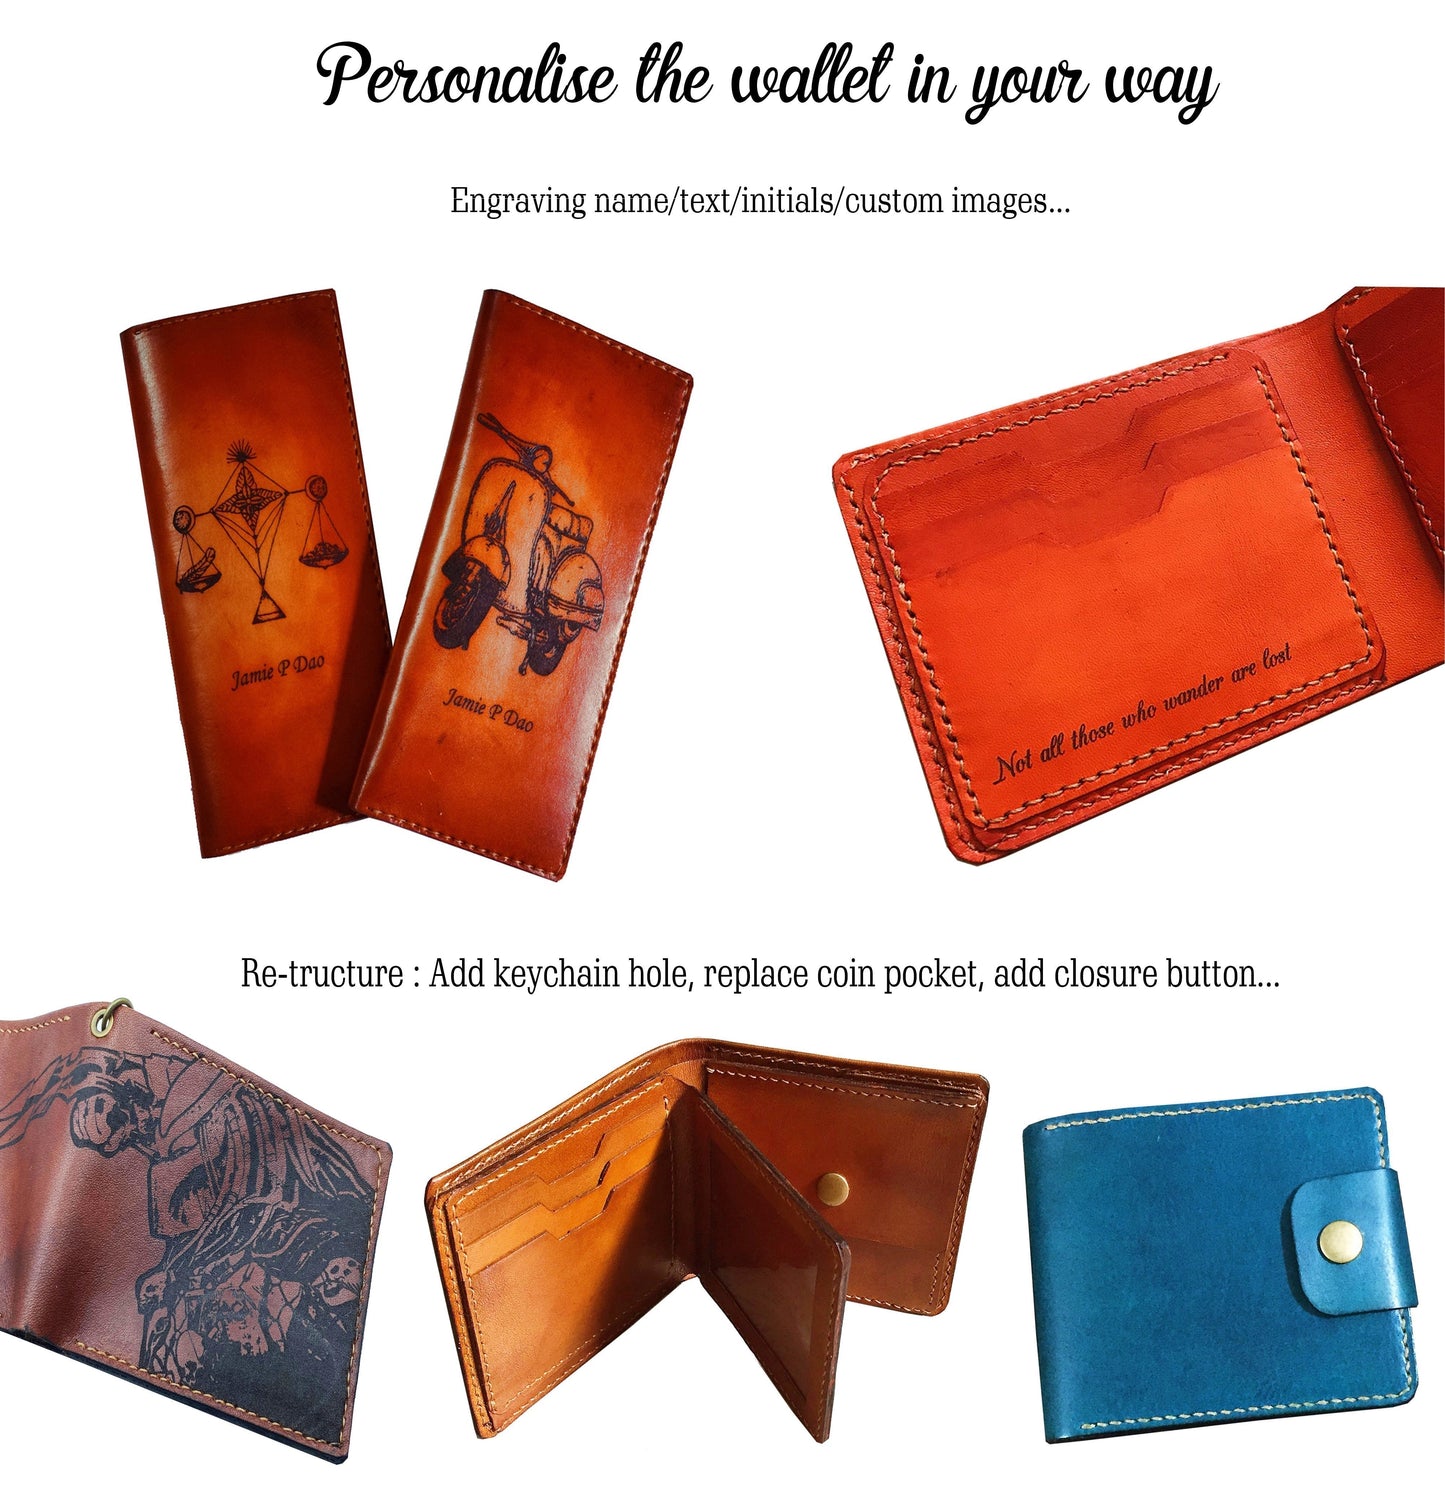 Christmas gifts idea for men, Customized leather wallet for dad, Starwars Mandalorian wallet, genuine leather bifold card wallet